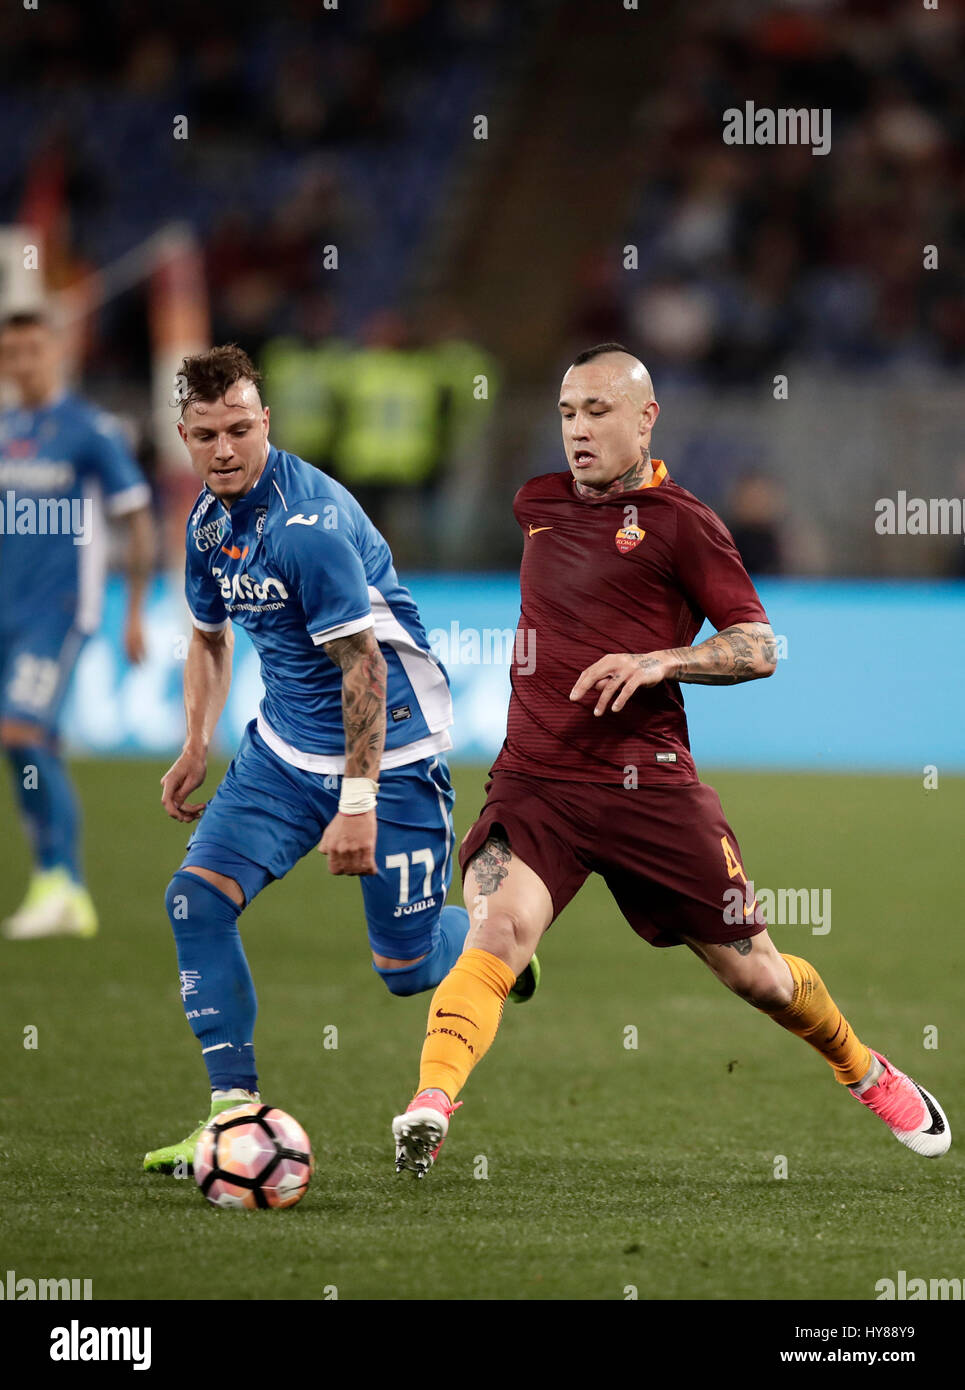 Rome, Italy. 01st Apr, 2017. RomaÕs Radja Nainggolan, right, is challenged by Empoli Marcel Buchel during the Serie A soccer match between Roma and Empoli at the Olympic stadium. Roma won 2-0. Credit: Isabella Bonotto/Pacific Press/Alamy Live News Stock Photo